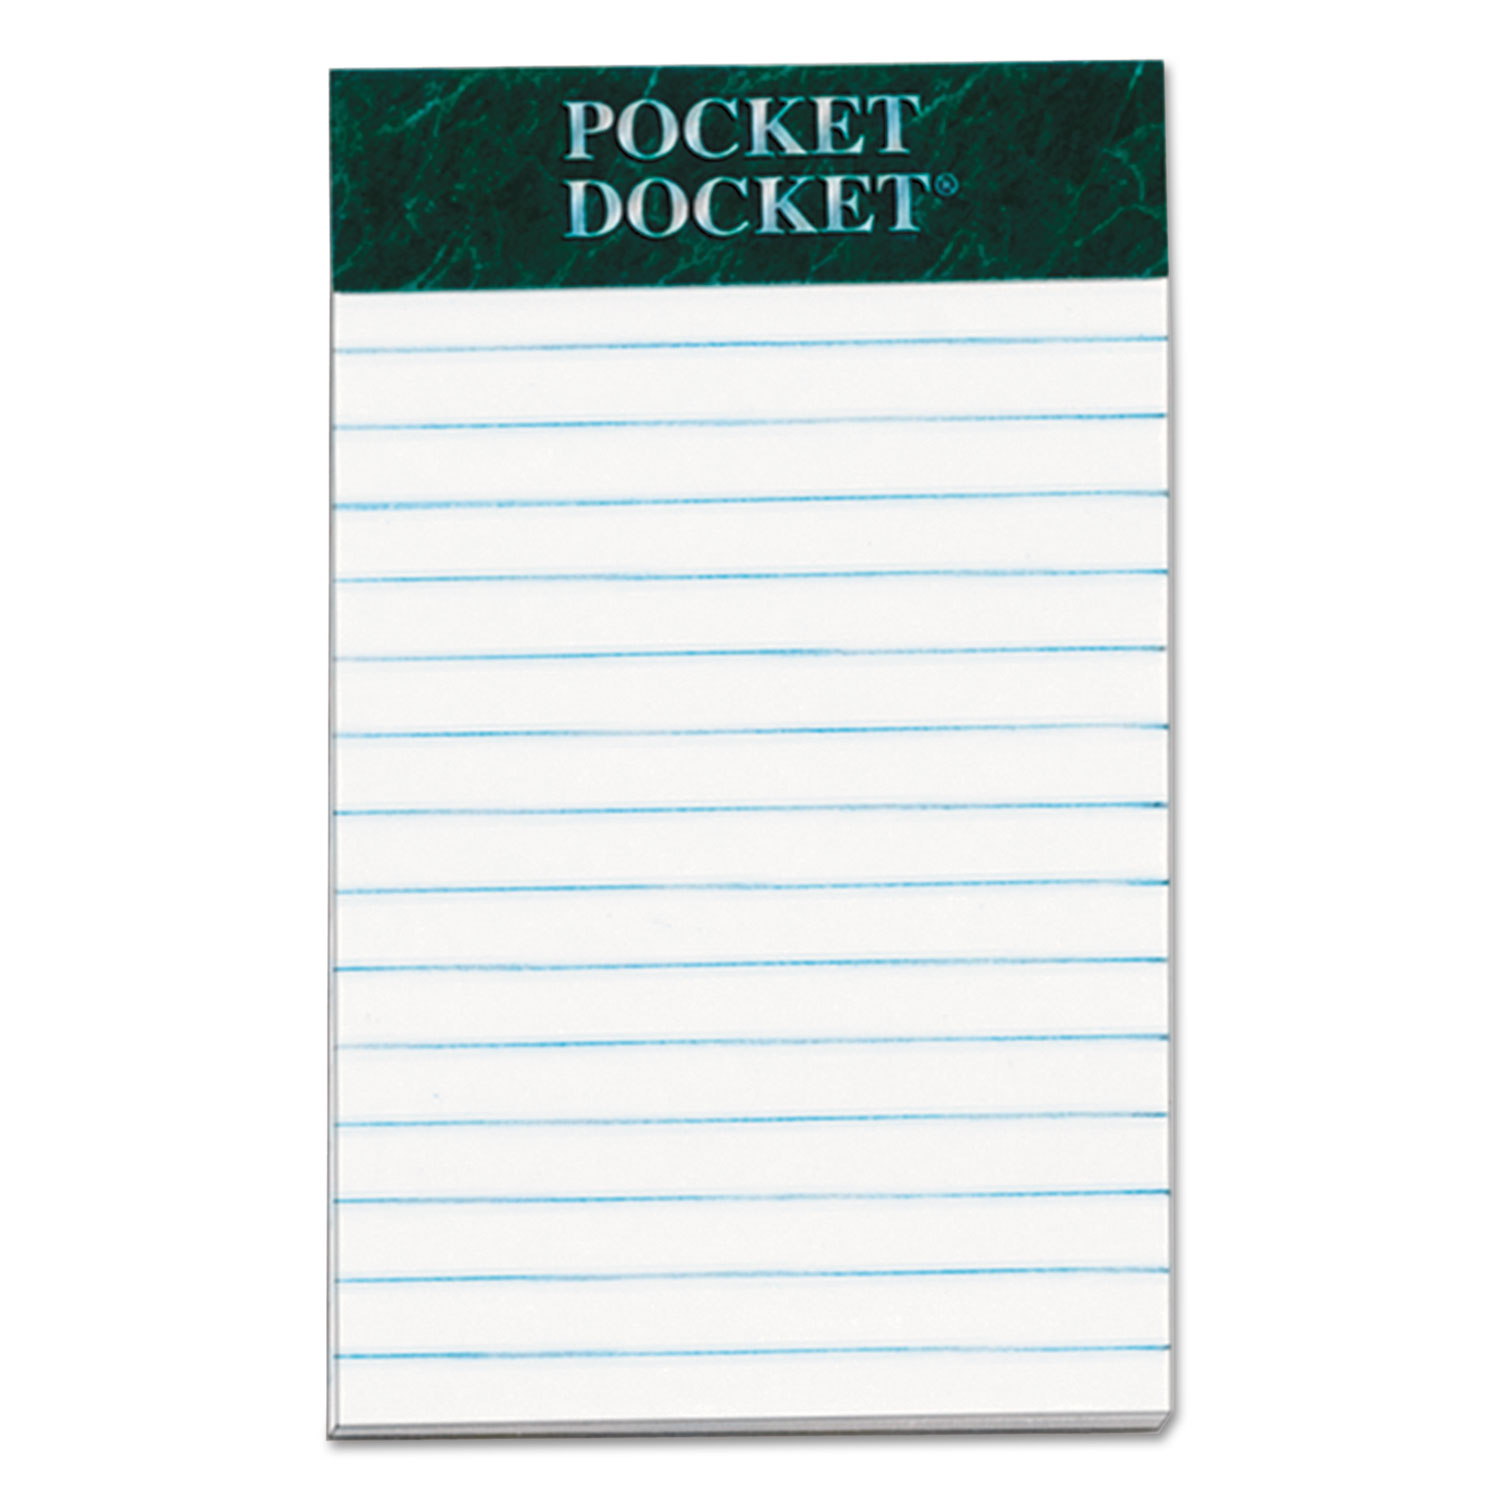  TOPS 64680 Docket Ruled Perforated Pads, Medium/College Rule, 3 x 5, White, 50 Sheets, 12/Pack (TOP64680) 